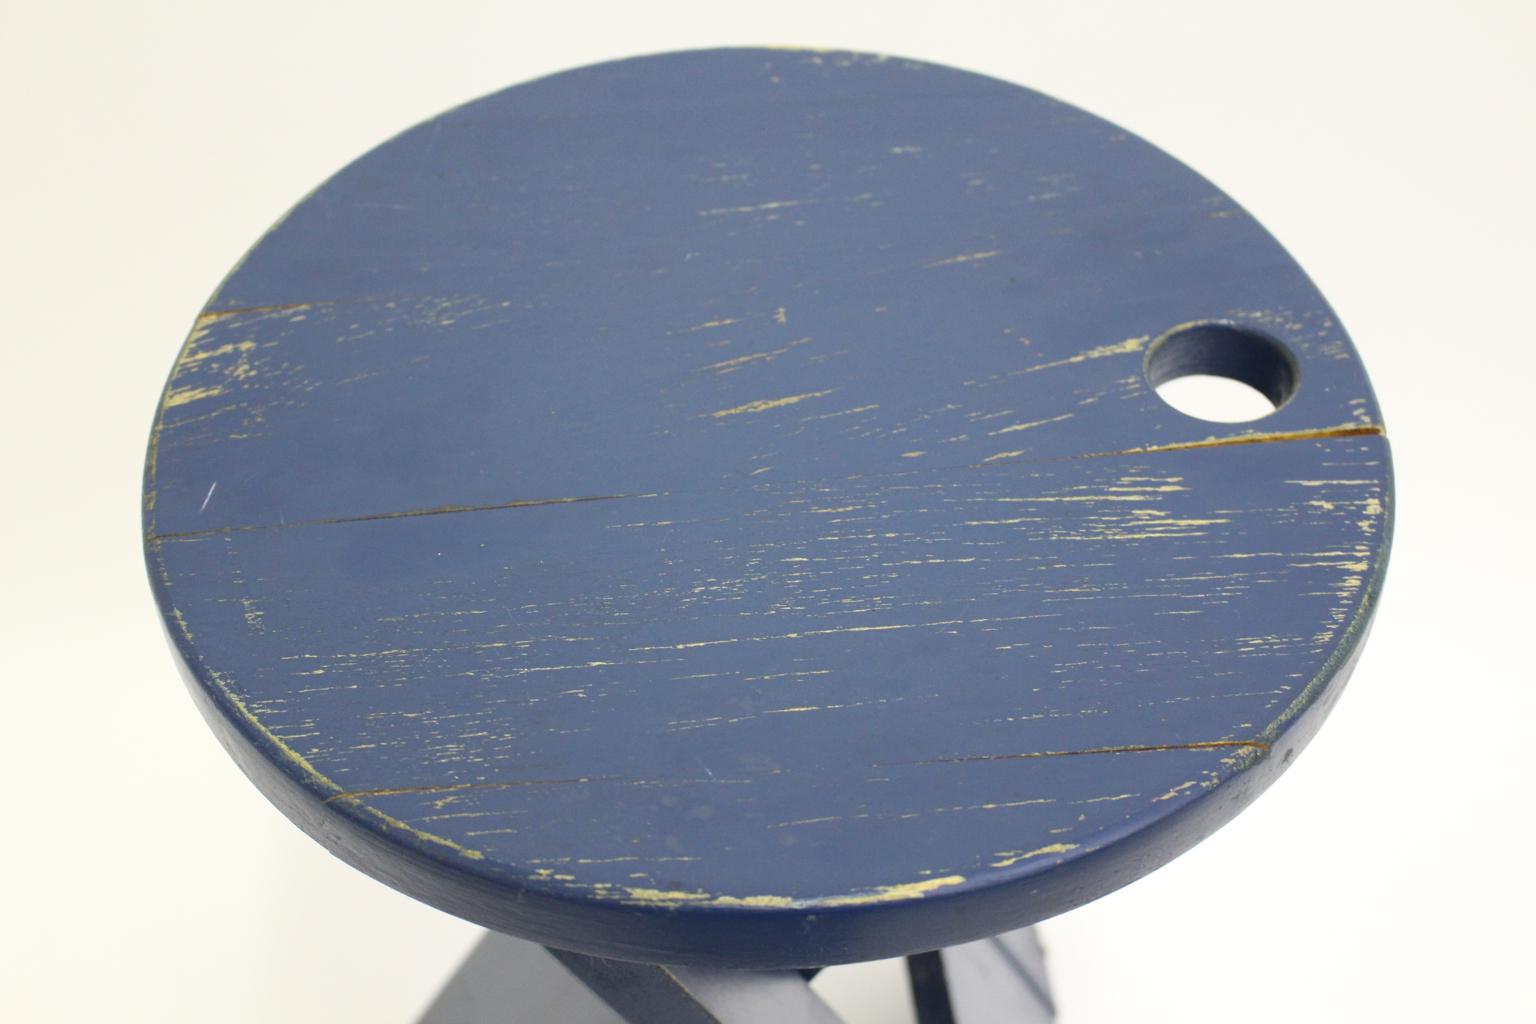 Lacquered Mid-Century Modern Blue Beech Vintage Folding Stool TS Roger Tallon 1970s France For Sale